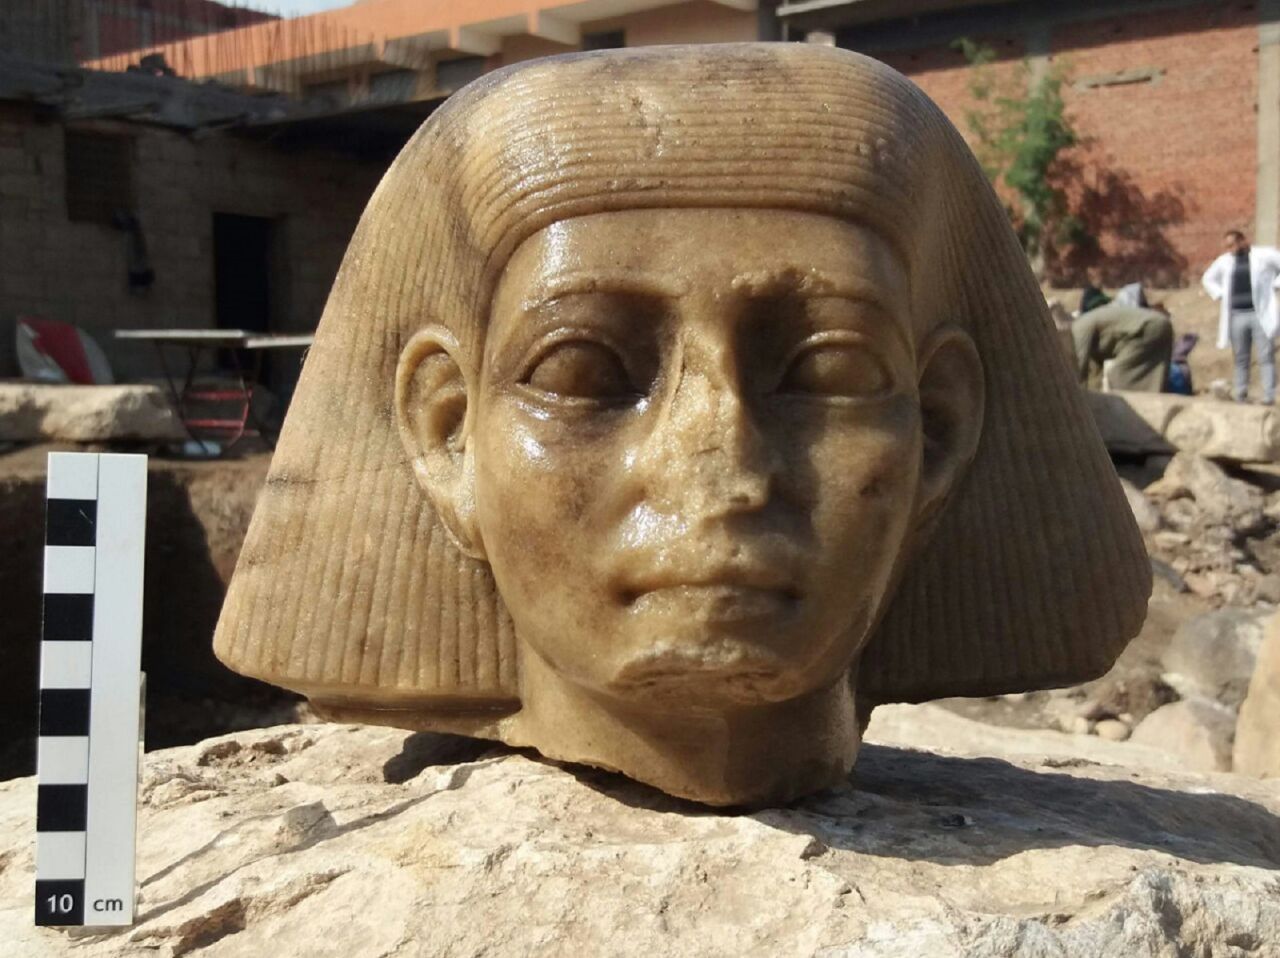 Other finds at the site include this head, also made from quartzite, dating to around 650 BC. Quartzite is a particularly durable material, and is therefore difficult to carve. Excavation leader Dietrich Raue says they may have used quartzite for its color variations -- the statue of Psamtik moves from purple to pink to dark brown.